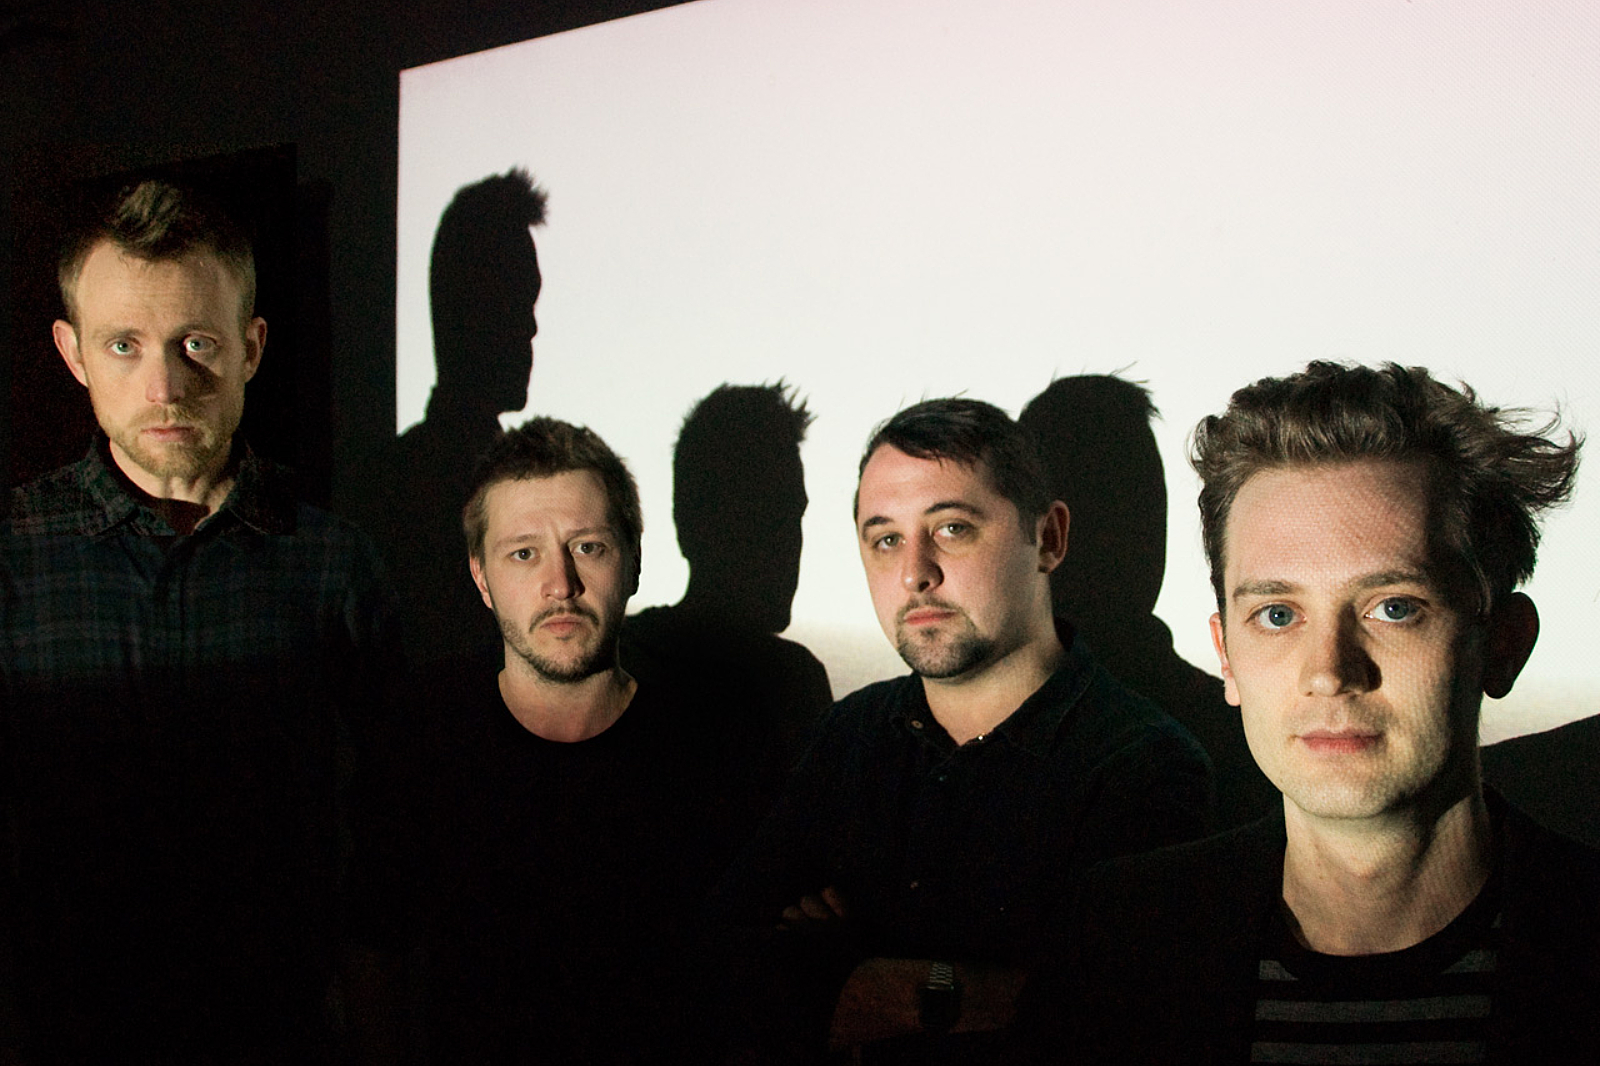 65daysofstatic criticise UK government’s arts funding initiatives